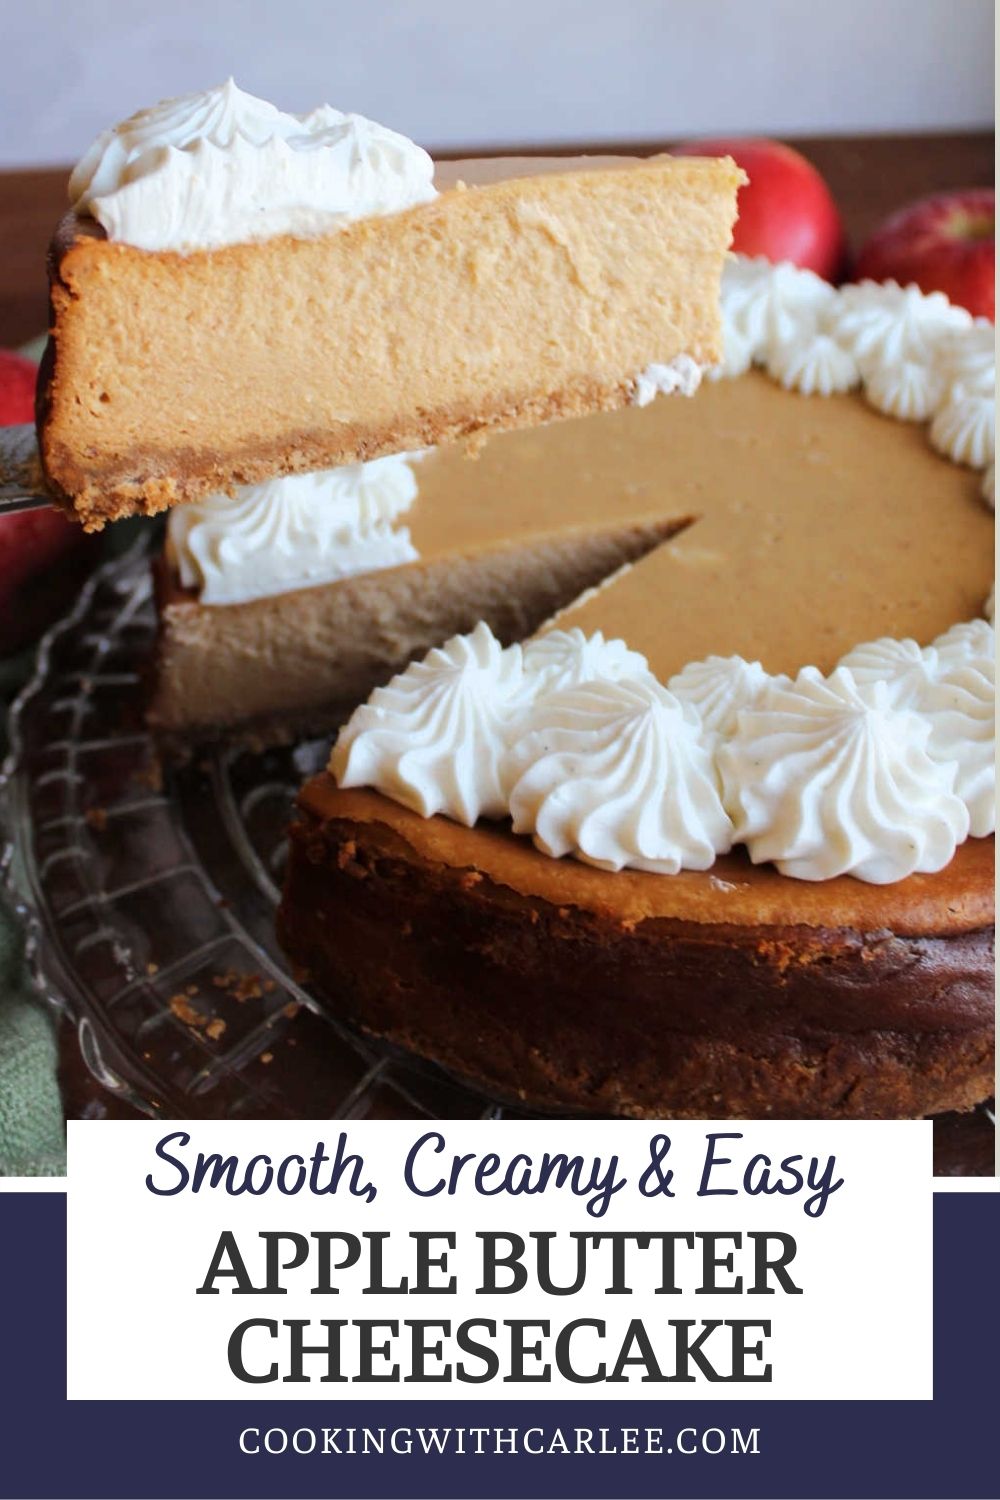 Apple butter cheesecake is creamy and delicious. It has just a hint of spice, a great apple flavor and beautiful texture.